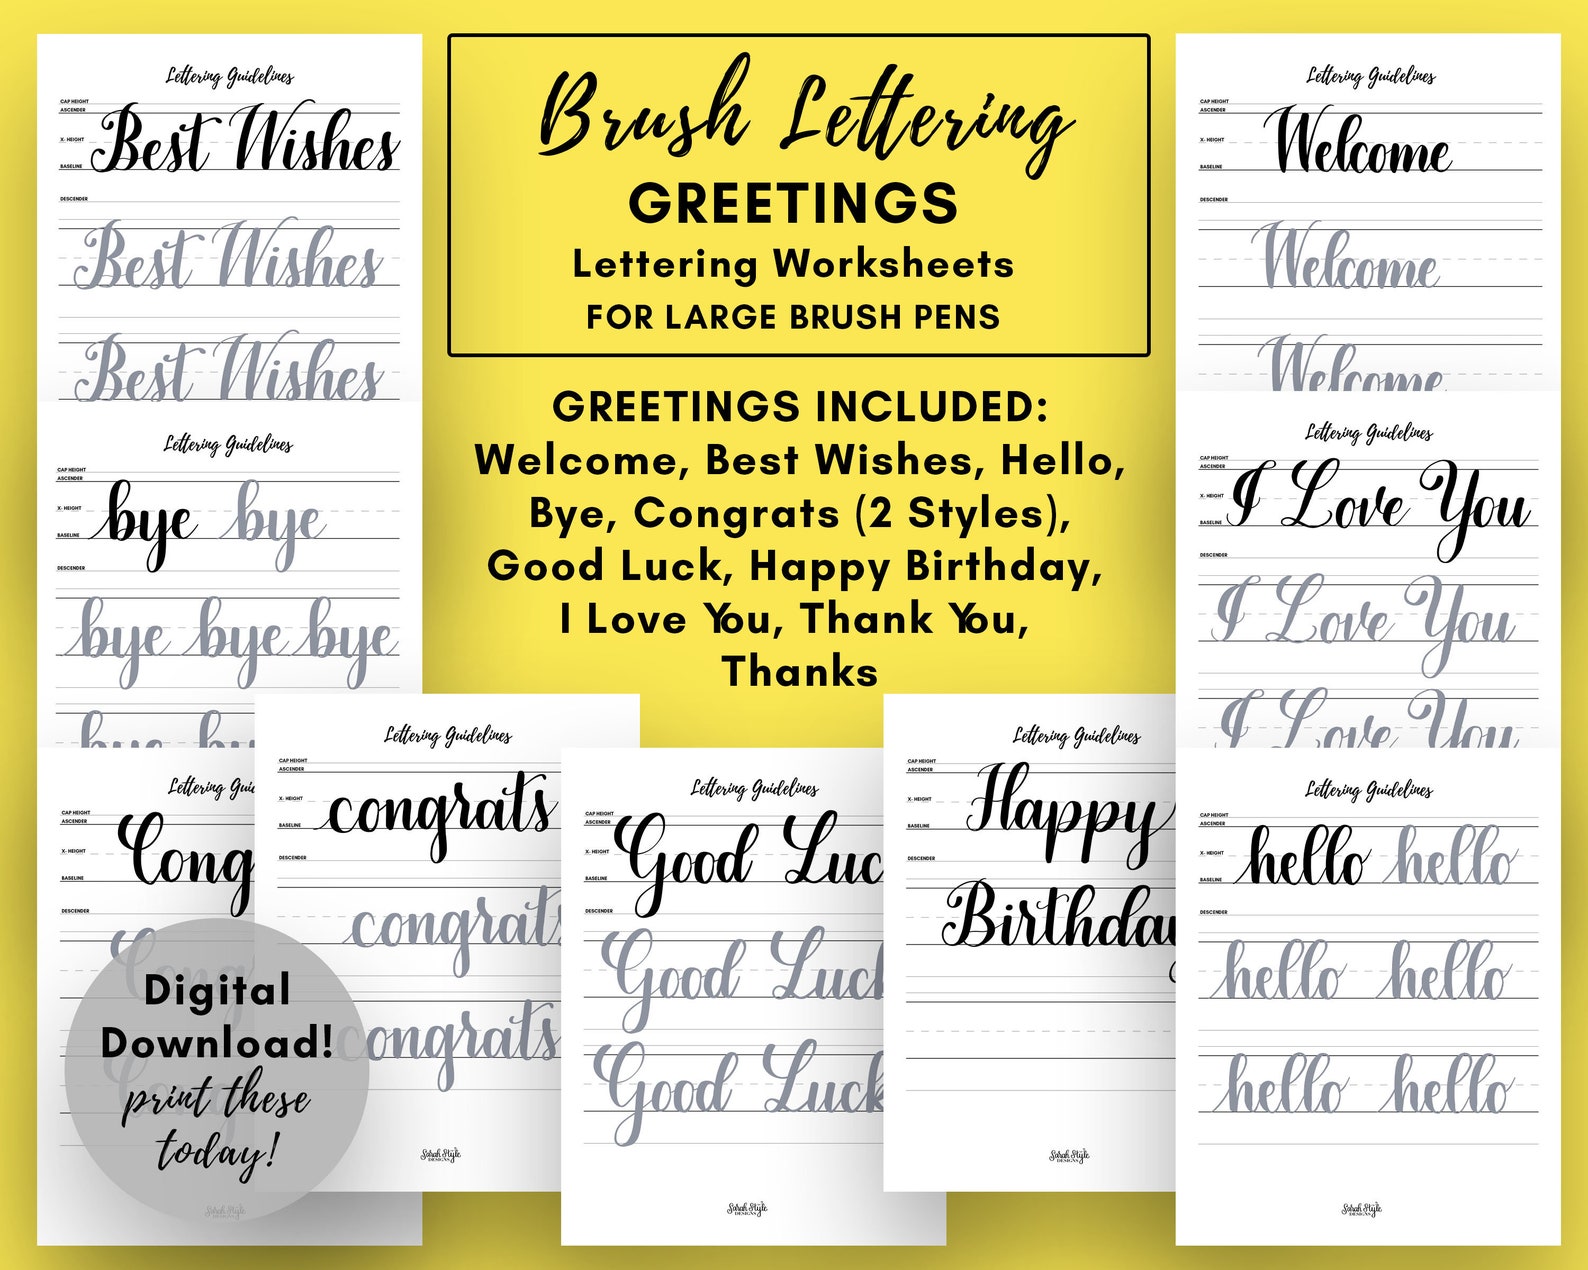 calligraphy-worksheets-greetings-calligraphy-practice-sheets-etsy